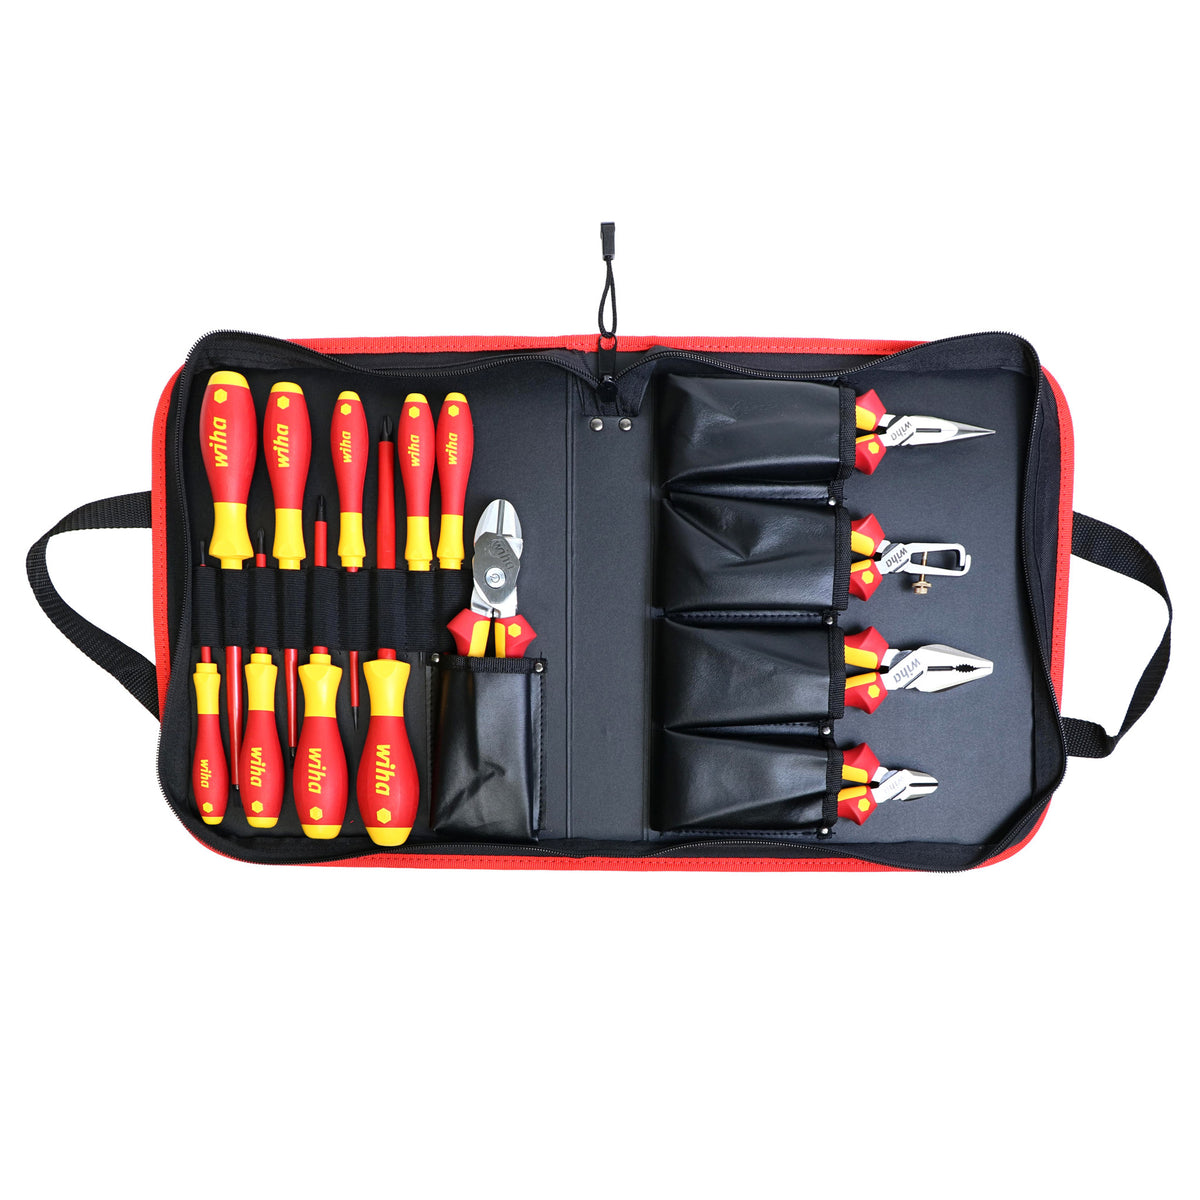 Wiha 32888 Insulated Pliers/Cutters & Drivers Set